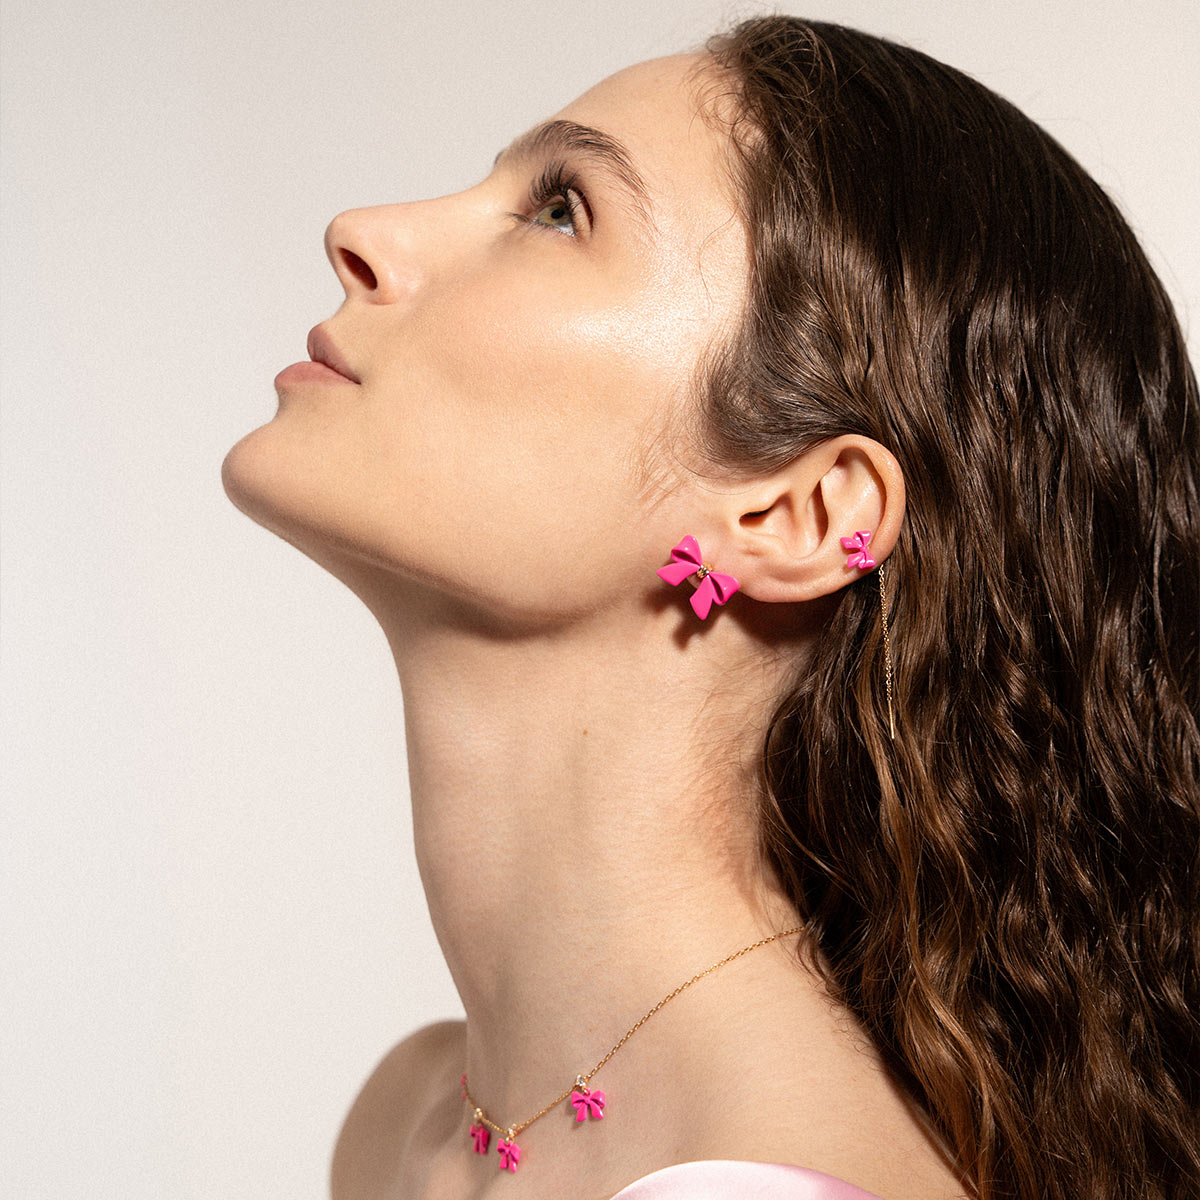 Earrings - Pair of earrings big bow neon pink - CANDY BOW - 2 | Rue des Mille